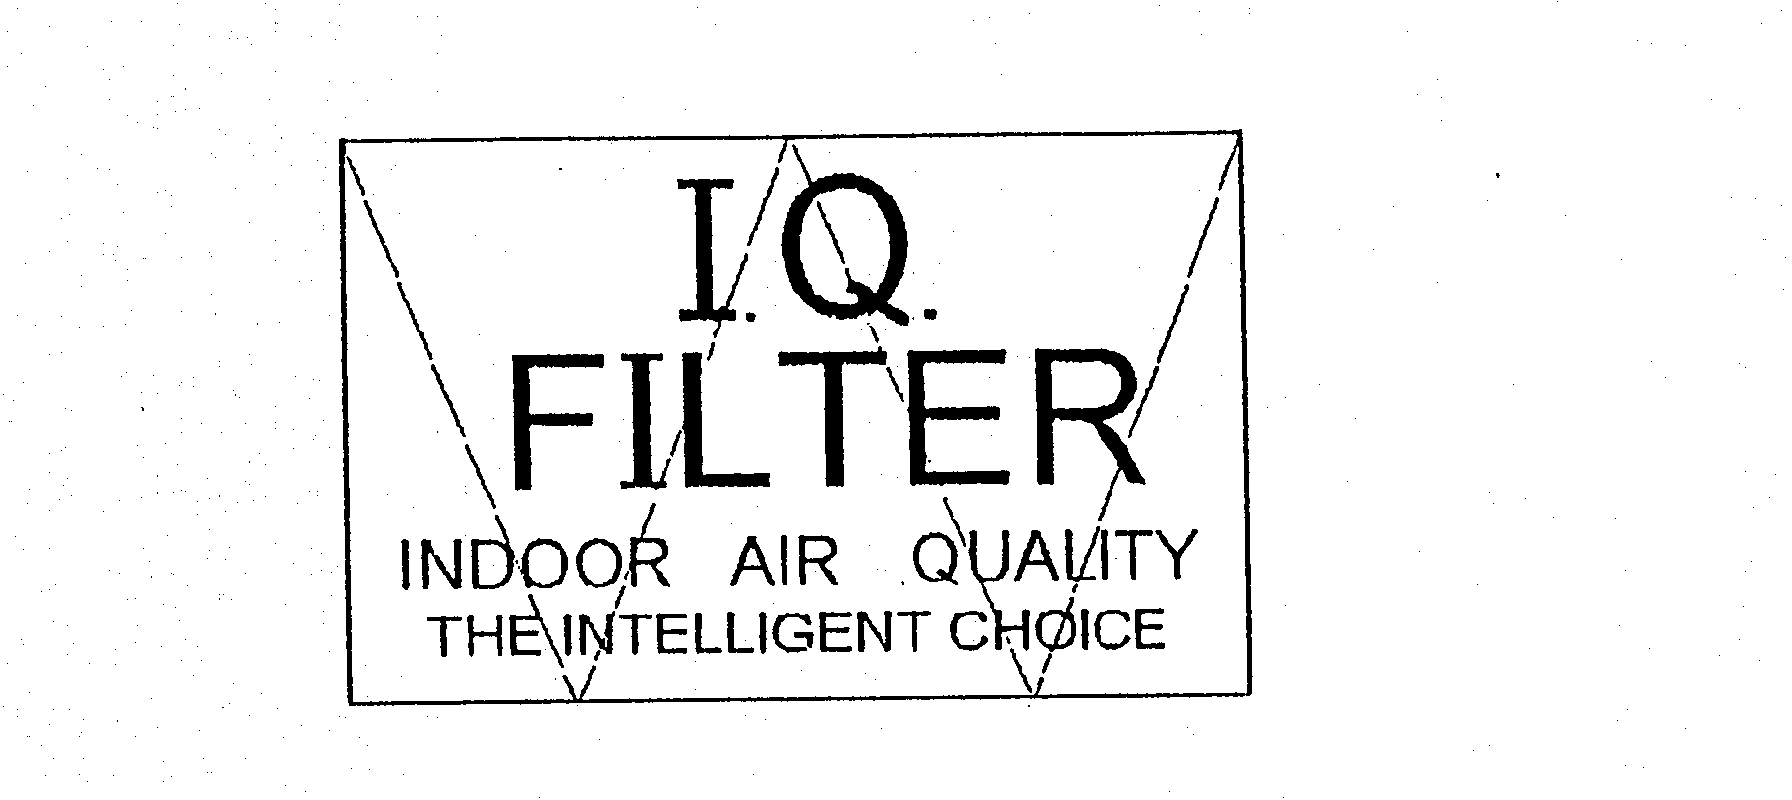  I.Q. FILTER INDOOR AIR QUALITY THE INTELLIGENT CHOICE